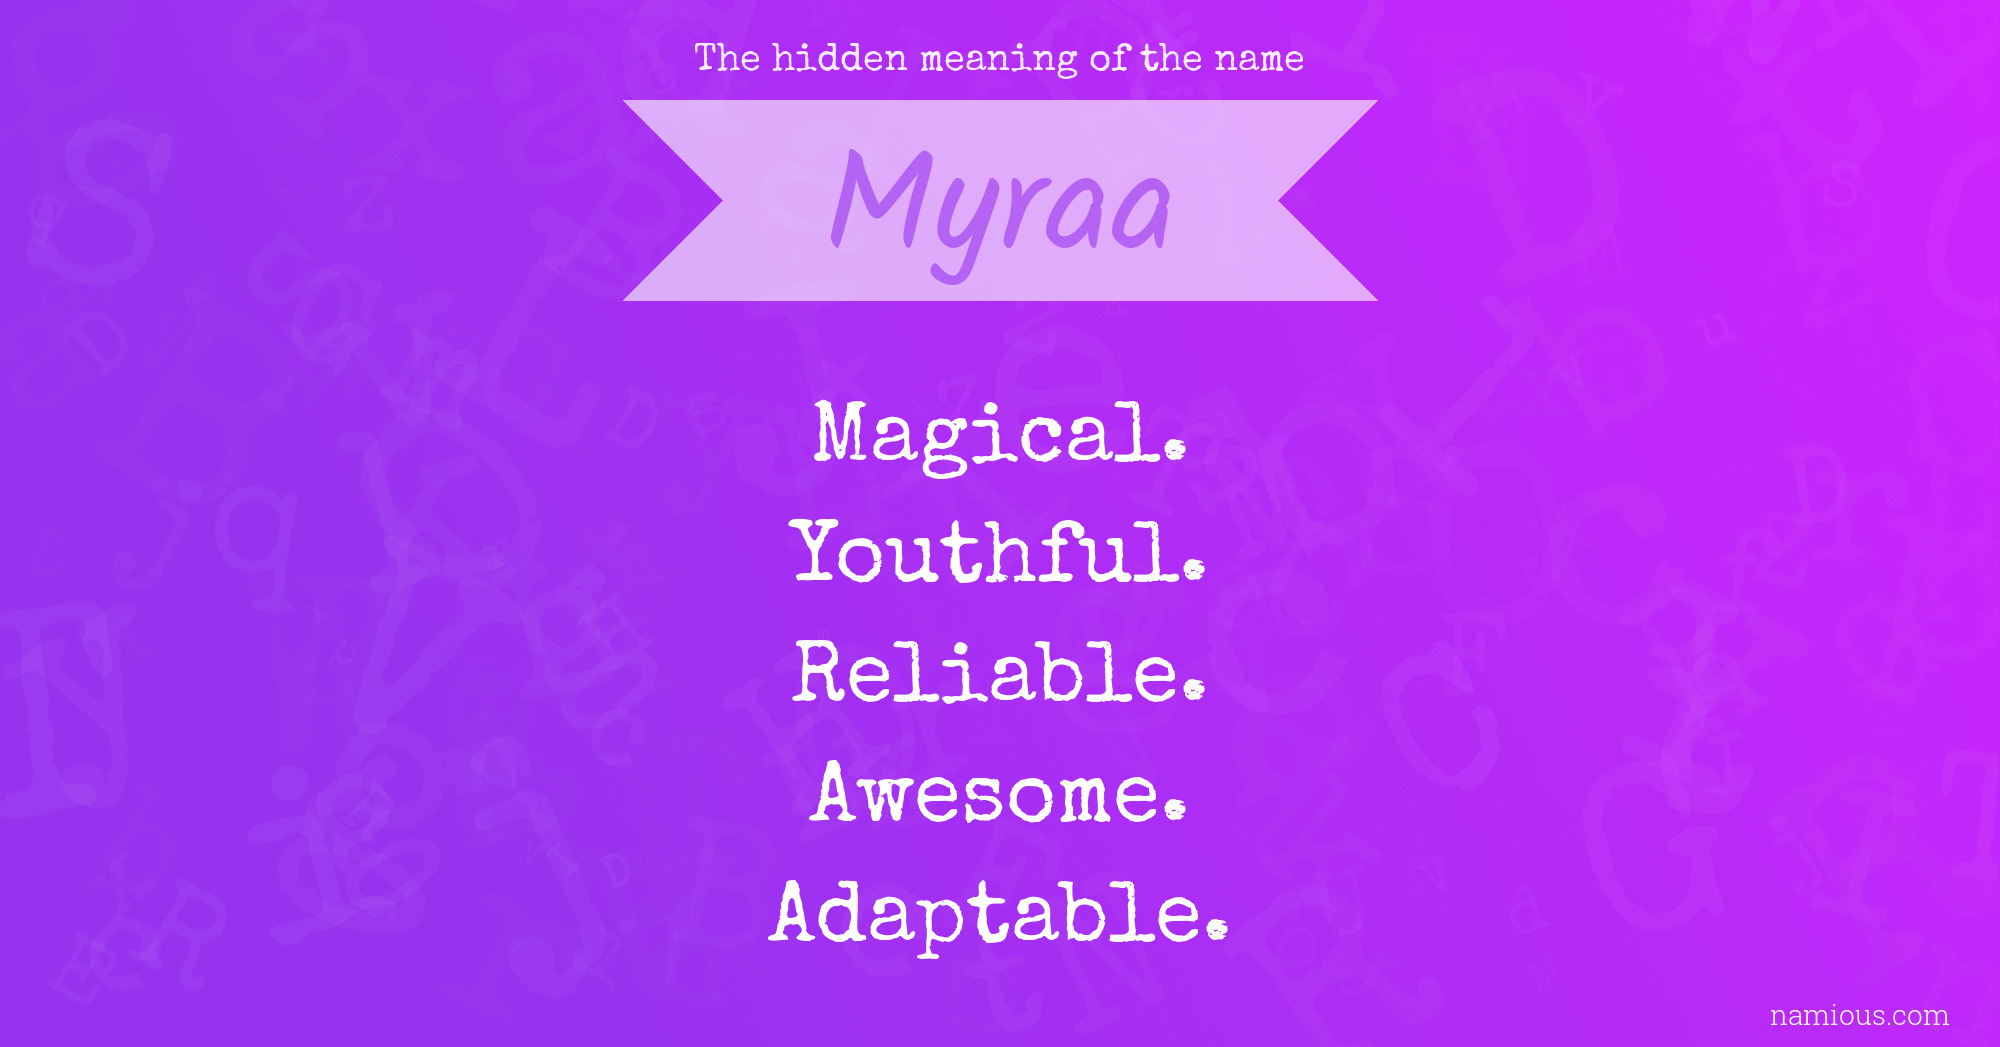 The hidden meaning of the name Myraa